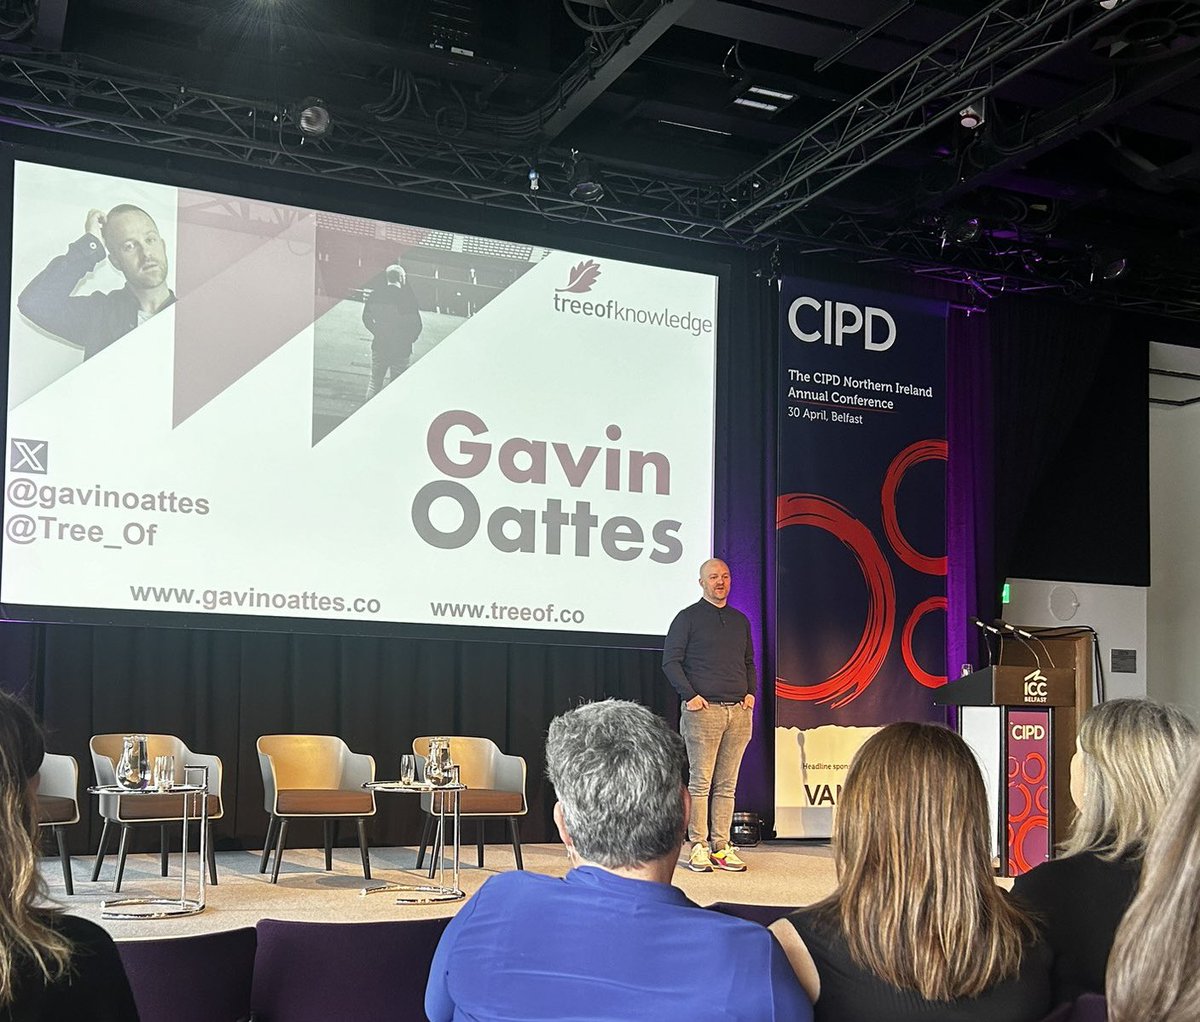 Yes, I did indeed! #CIPDNIConf24 certainly didn’t disappoint! Loved the hilarious, moving, energetic & inspirational speeches from Peter Cheese, Gavin Oattes & Cally Caroline Beaton. This conf always leaves you brimming with ideas to apply to your own job, career & workplace. Thx